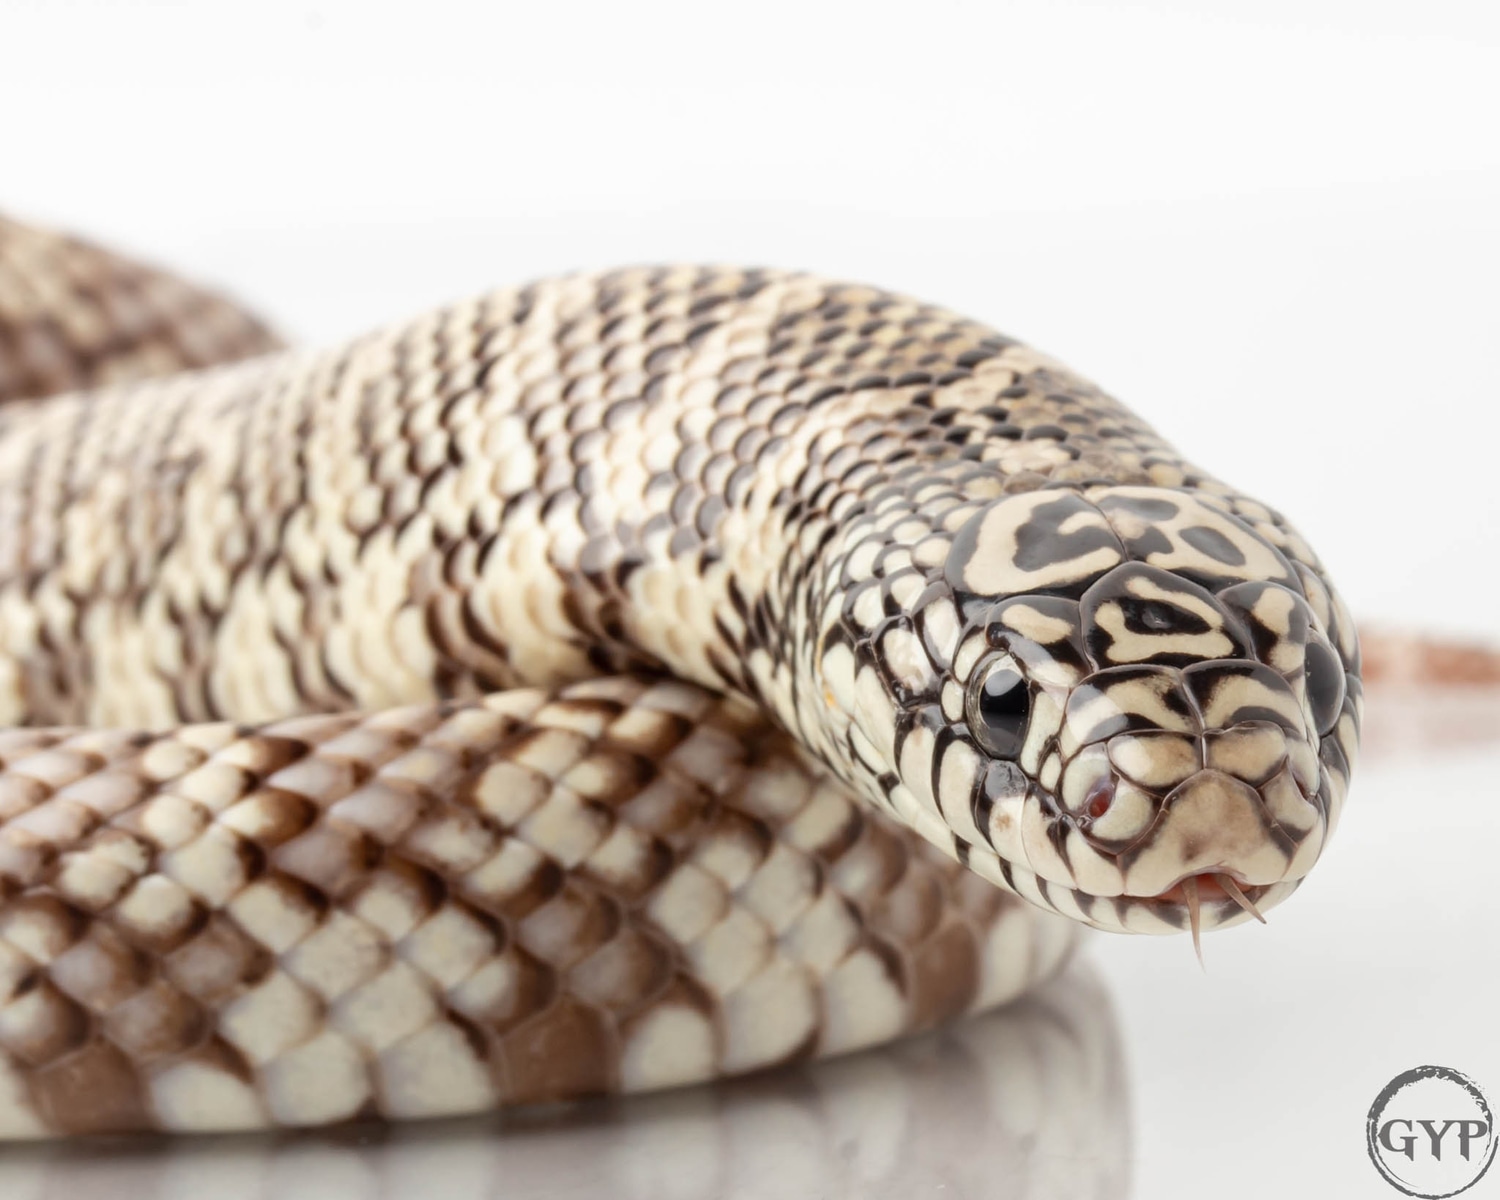 Anery Florida Kingsnake by Gopher Your Pet